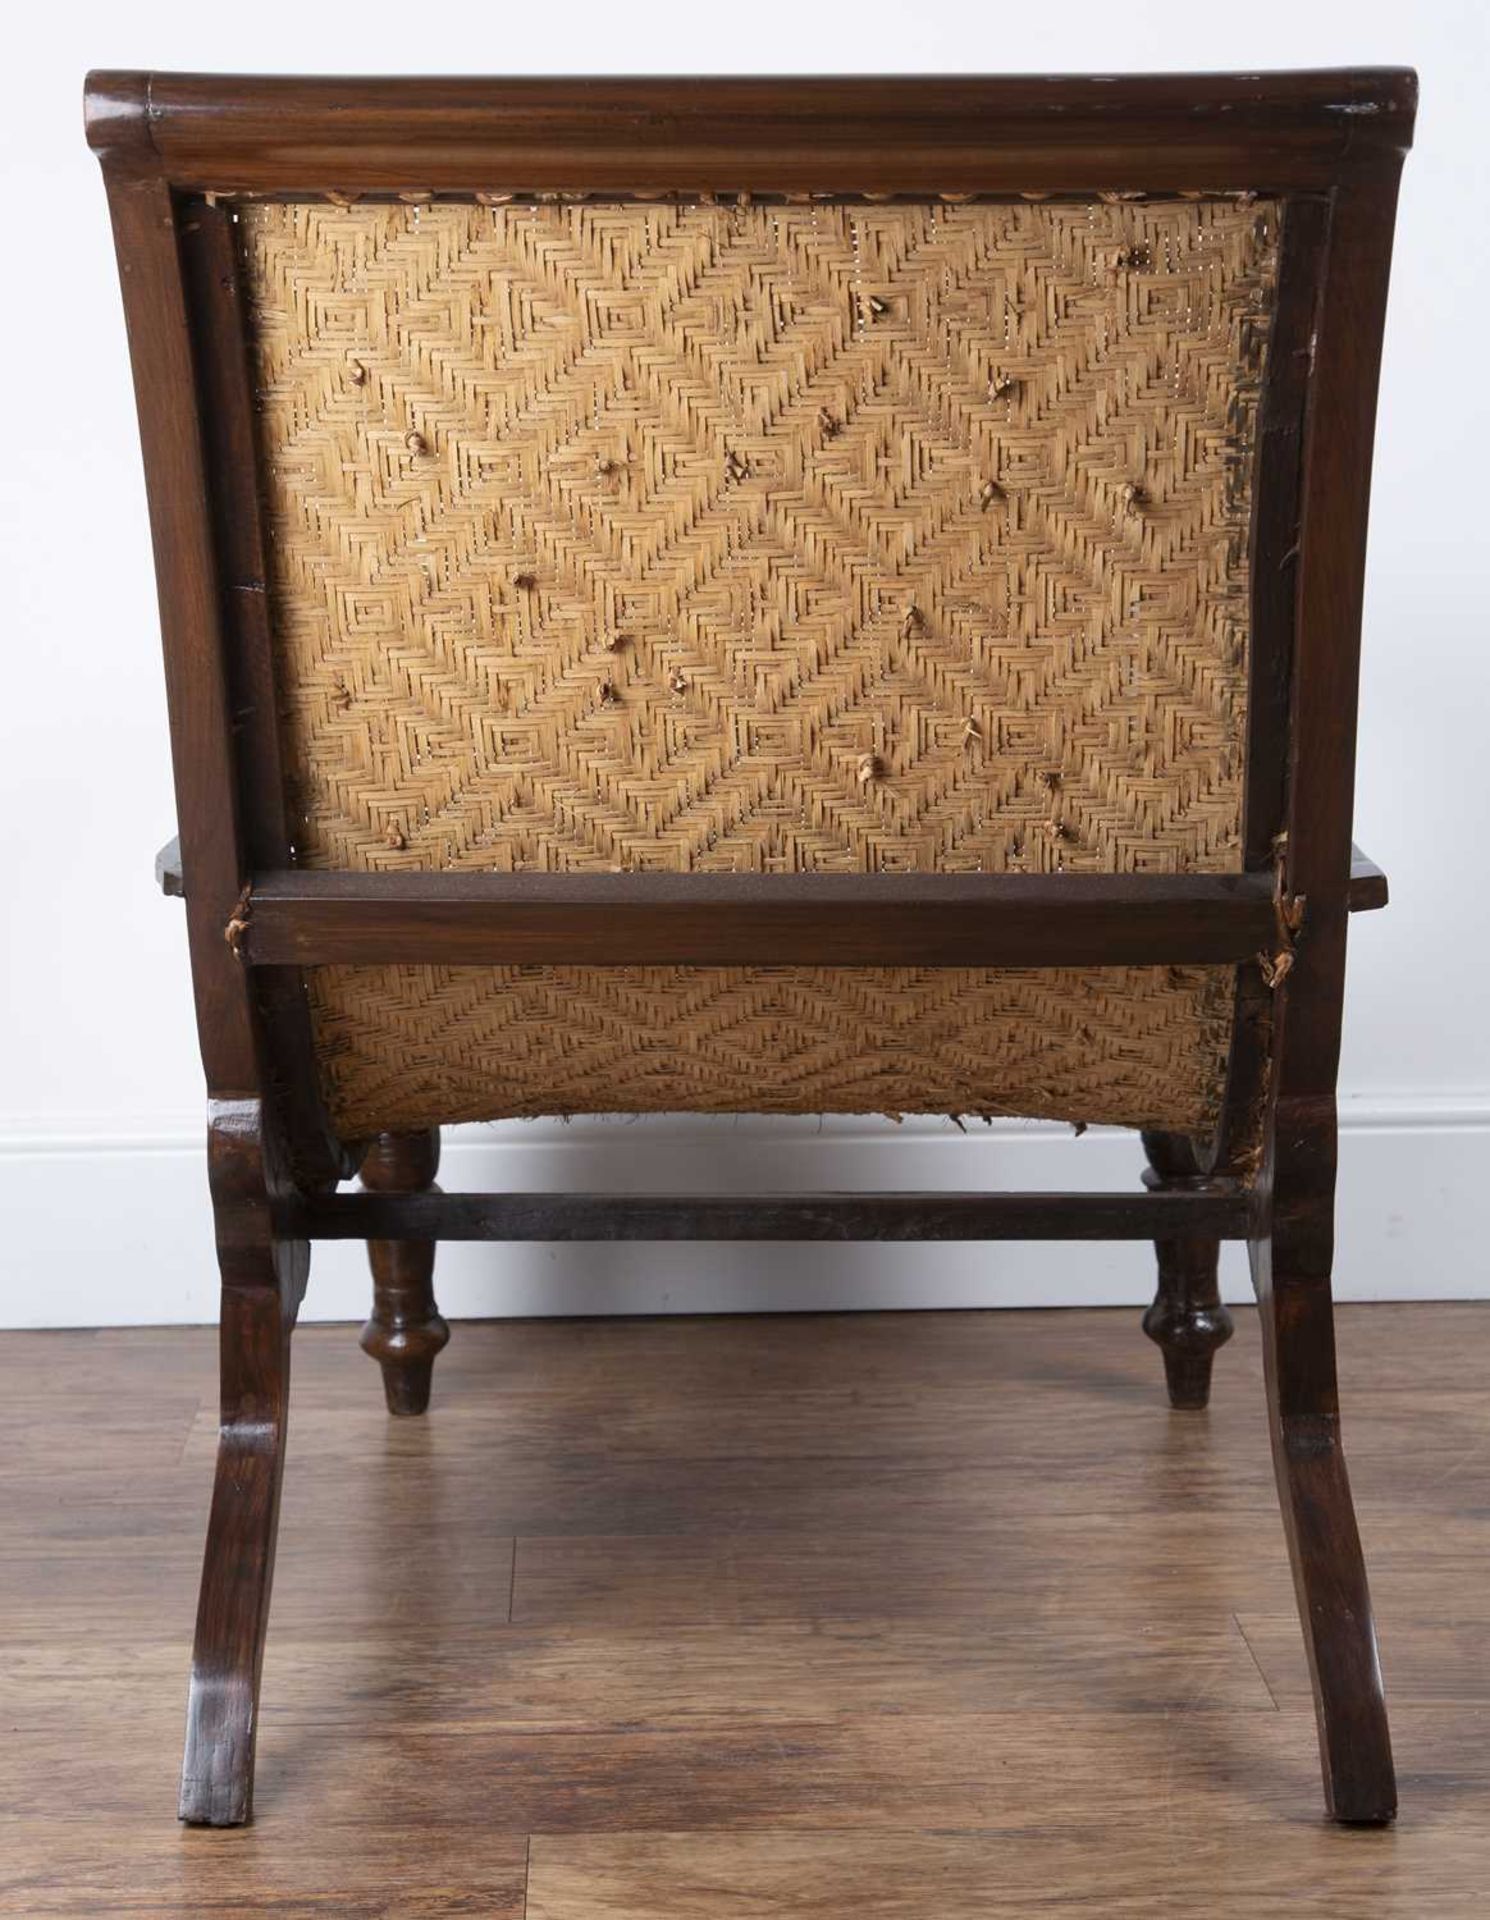 Plantation chair having a stained wood frame and woven rattan seat, 94cm high, 70cm wide overall x - Bild 4 aus 4